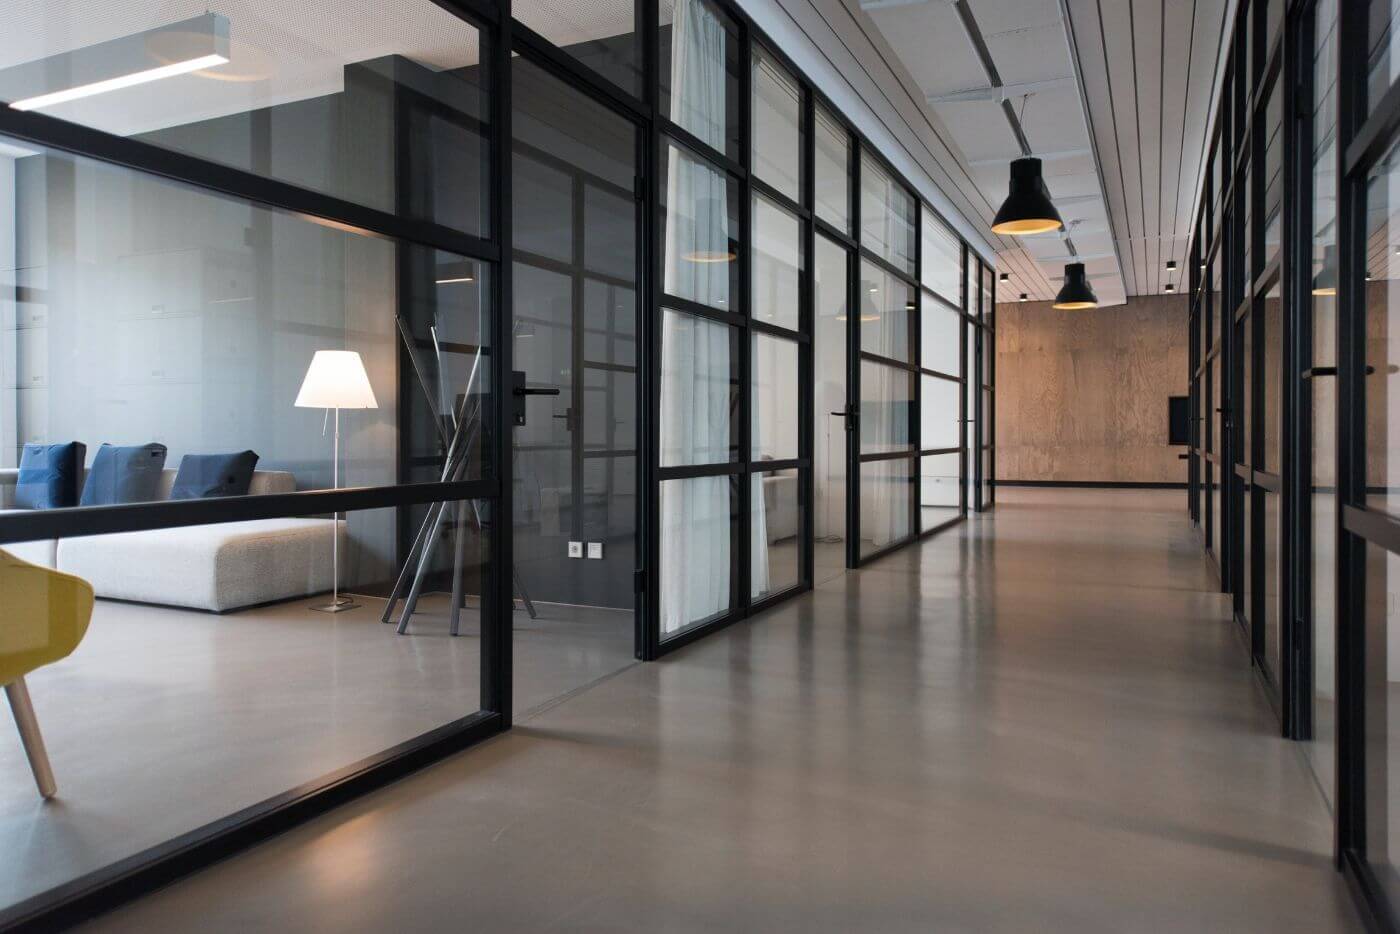 Spacious modern office corridor with glass partitions, designer furniture, and a polished concrete floor.